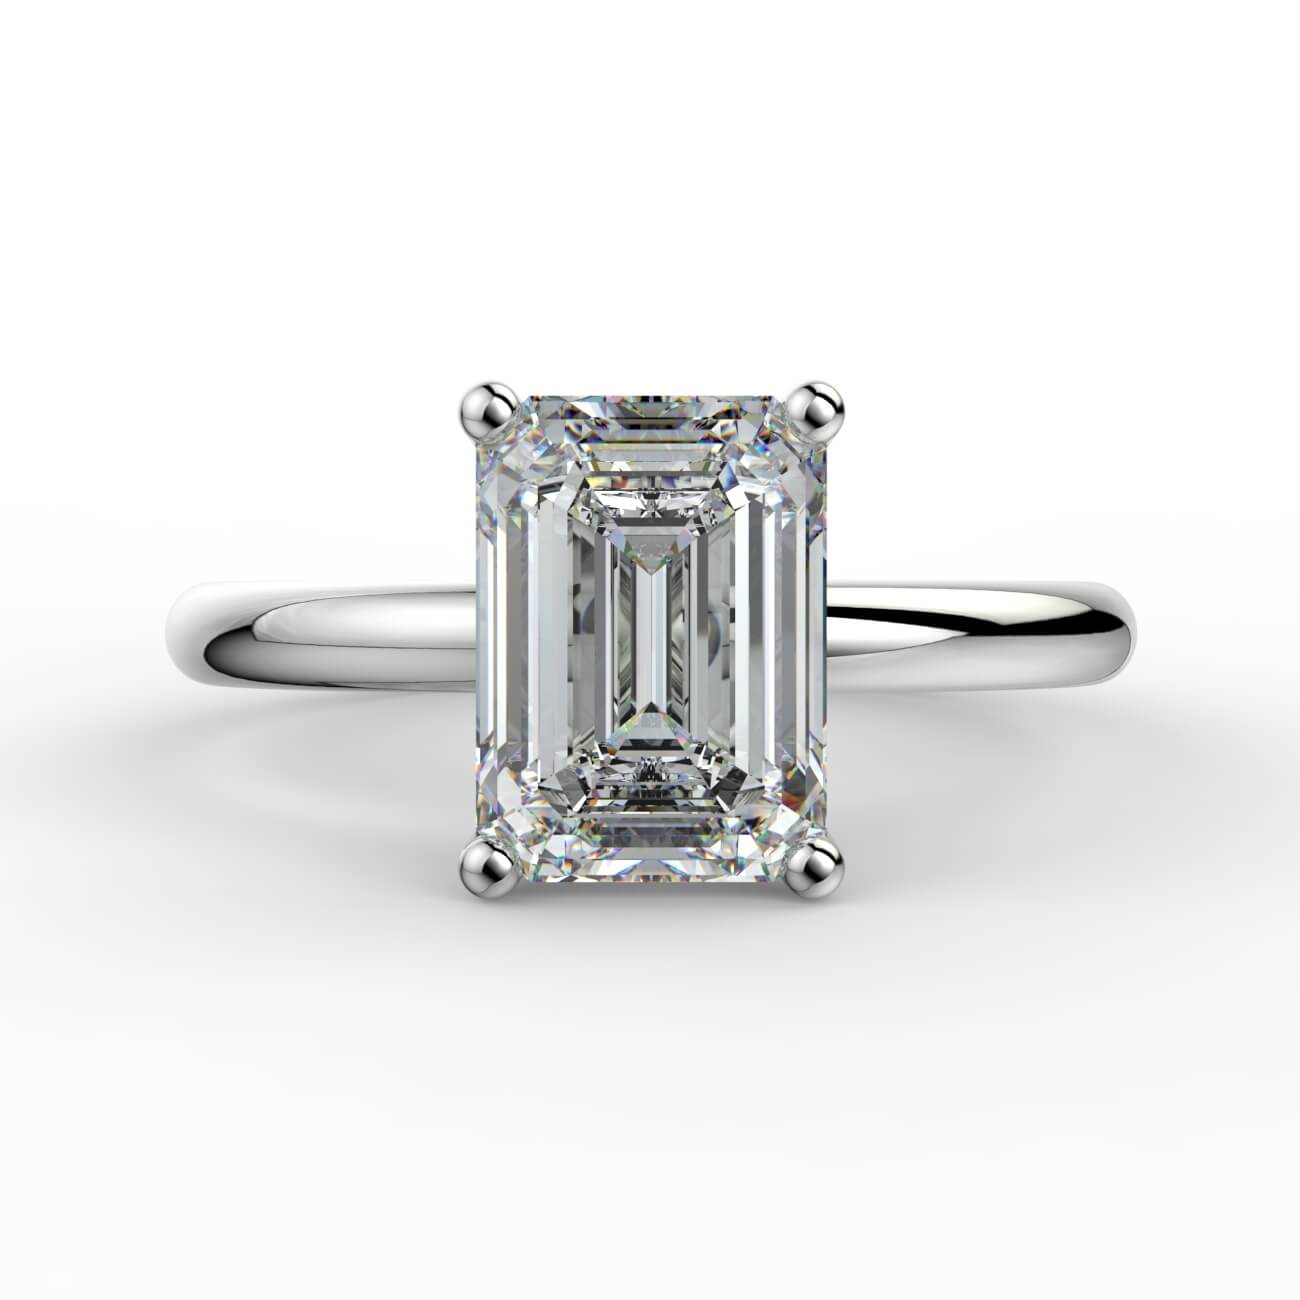 Comfort fit 4 claw emerald cut solitaire diamond ring in white gold – Australian Diamond Network